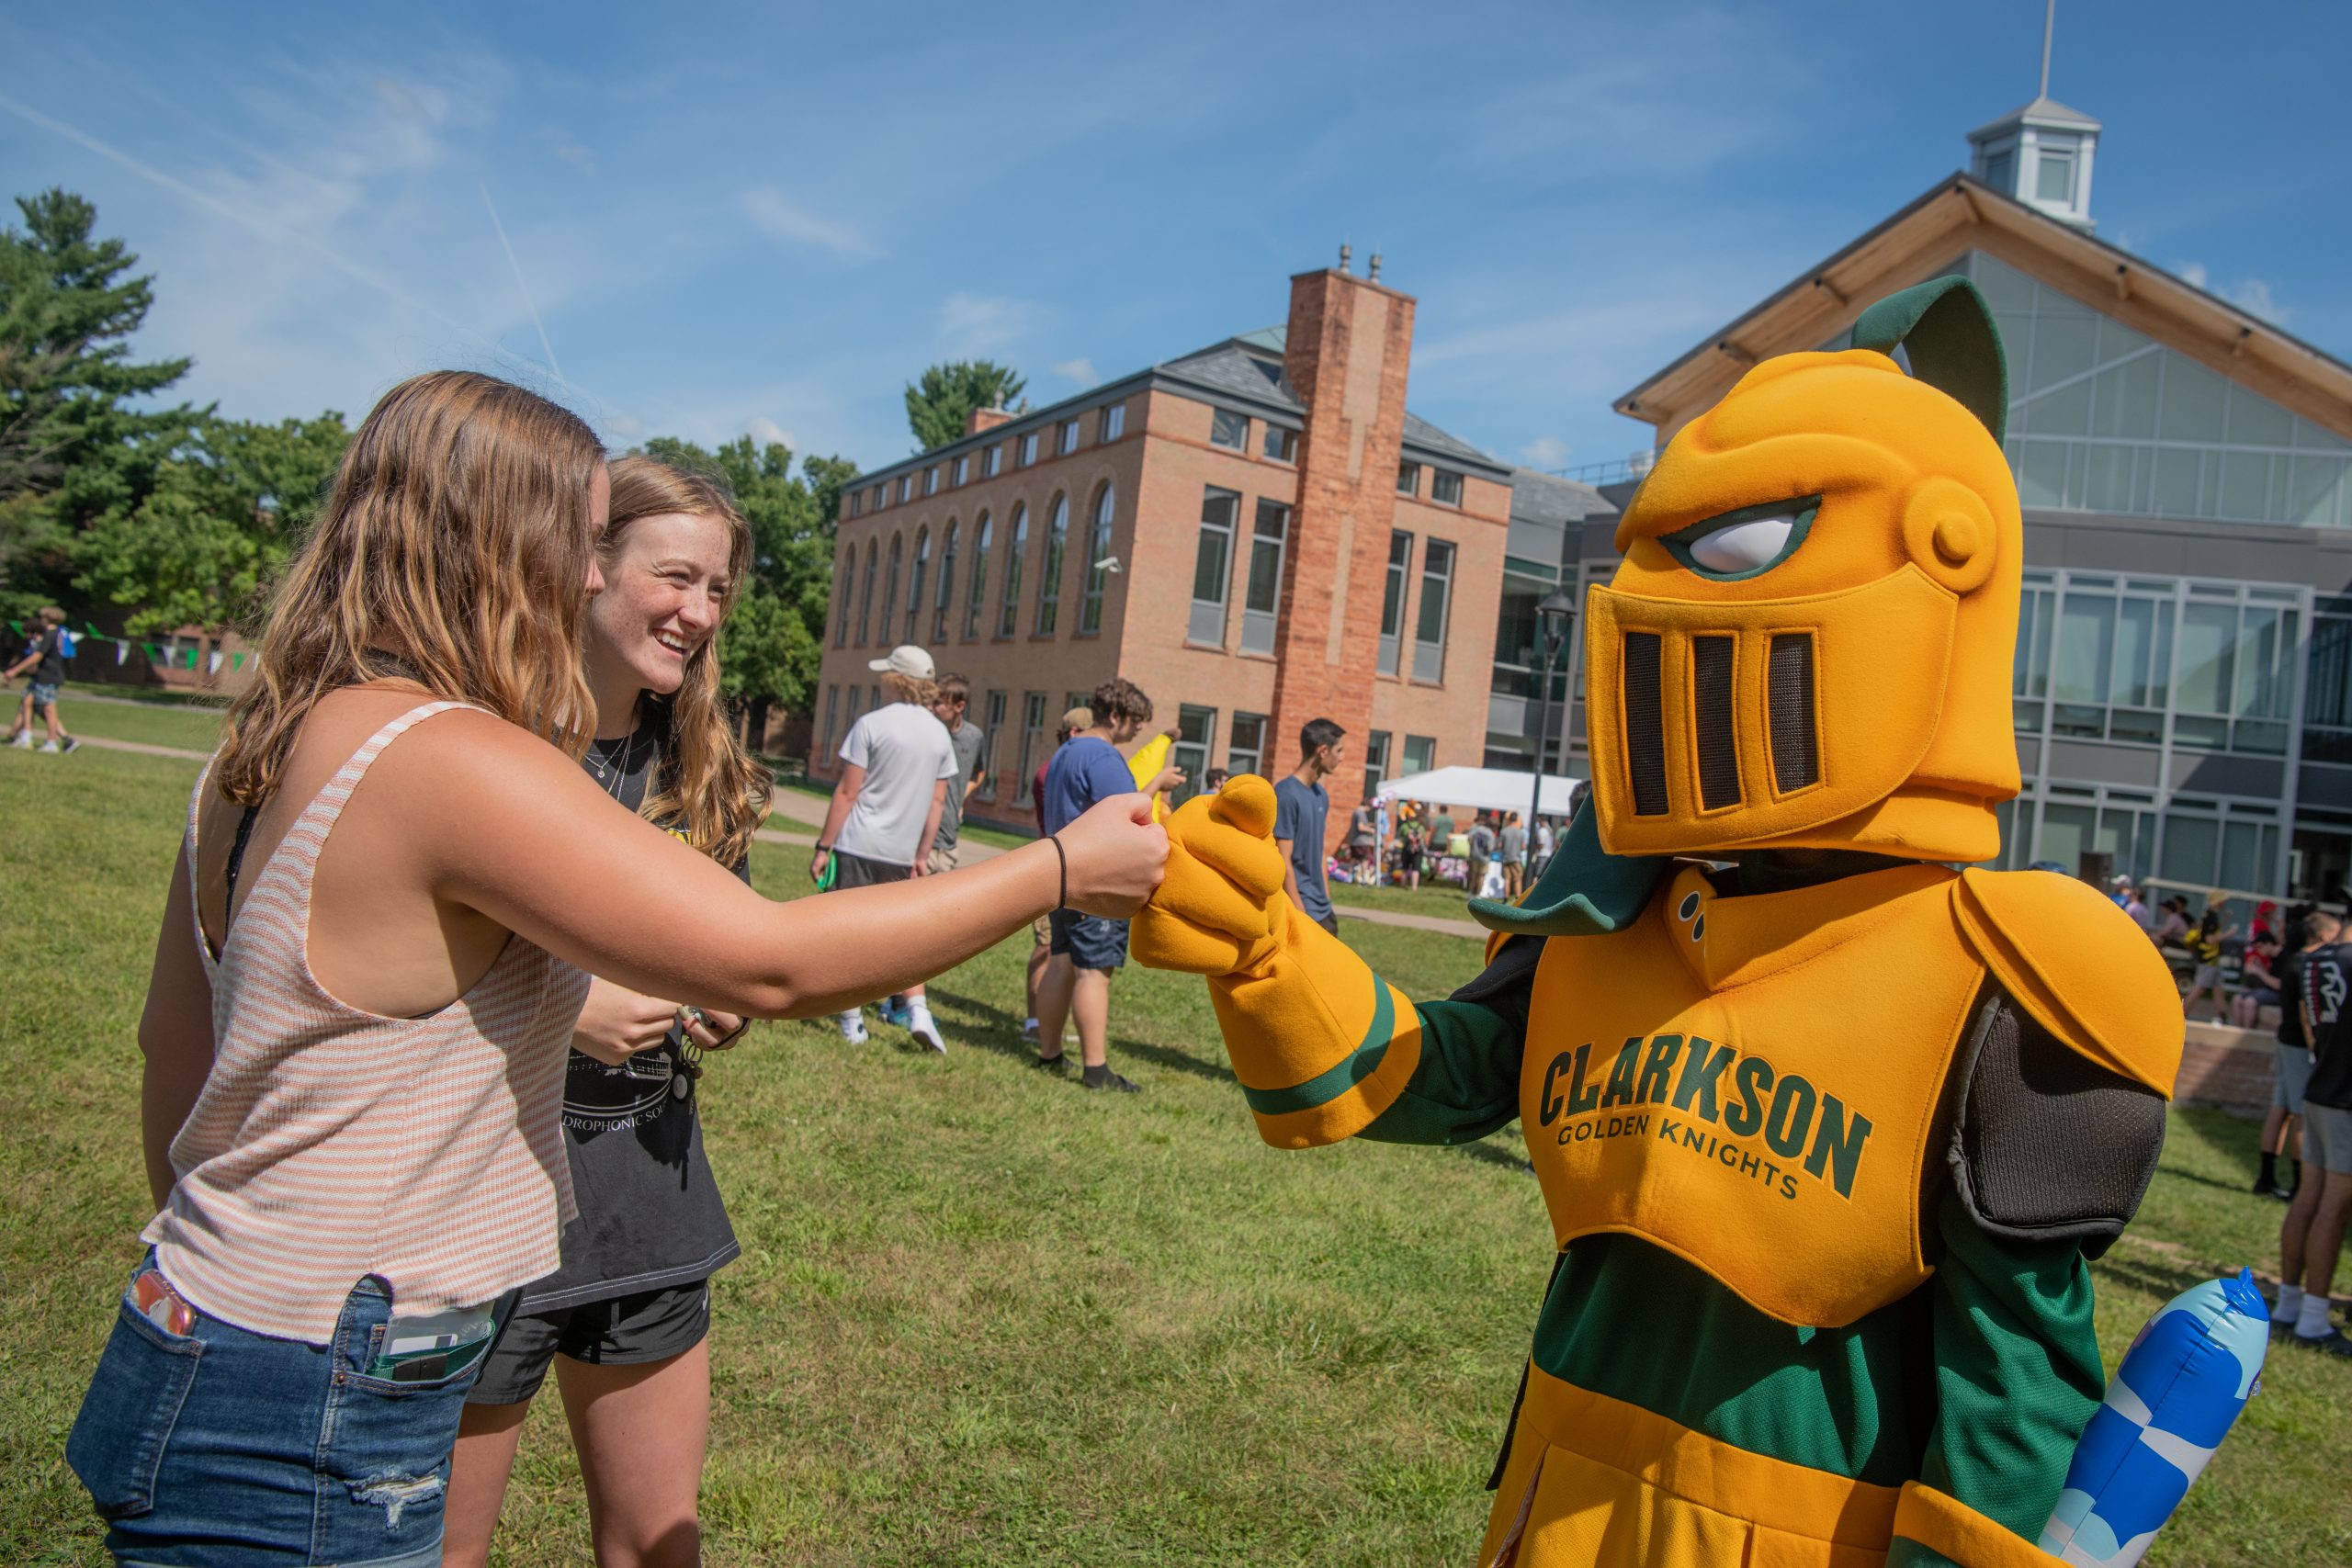 Two Clarkson undergraduate students bump fists with the Golden Knight mascot on the Quad on a summer day.